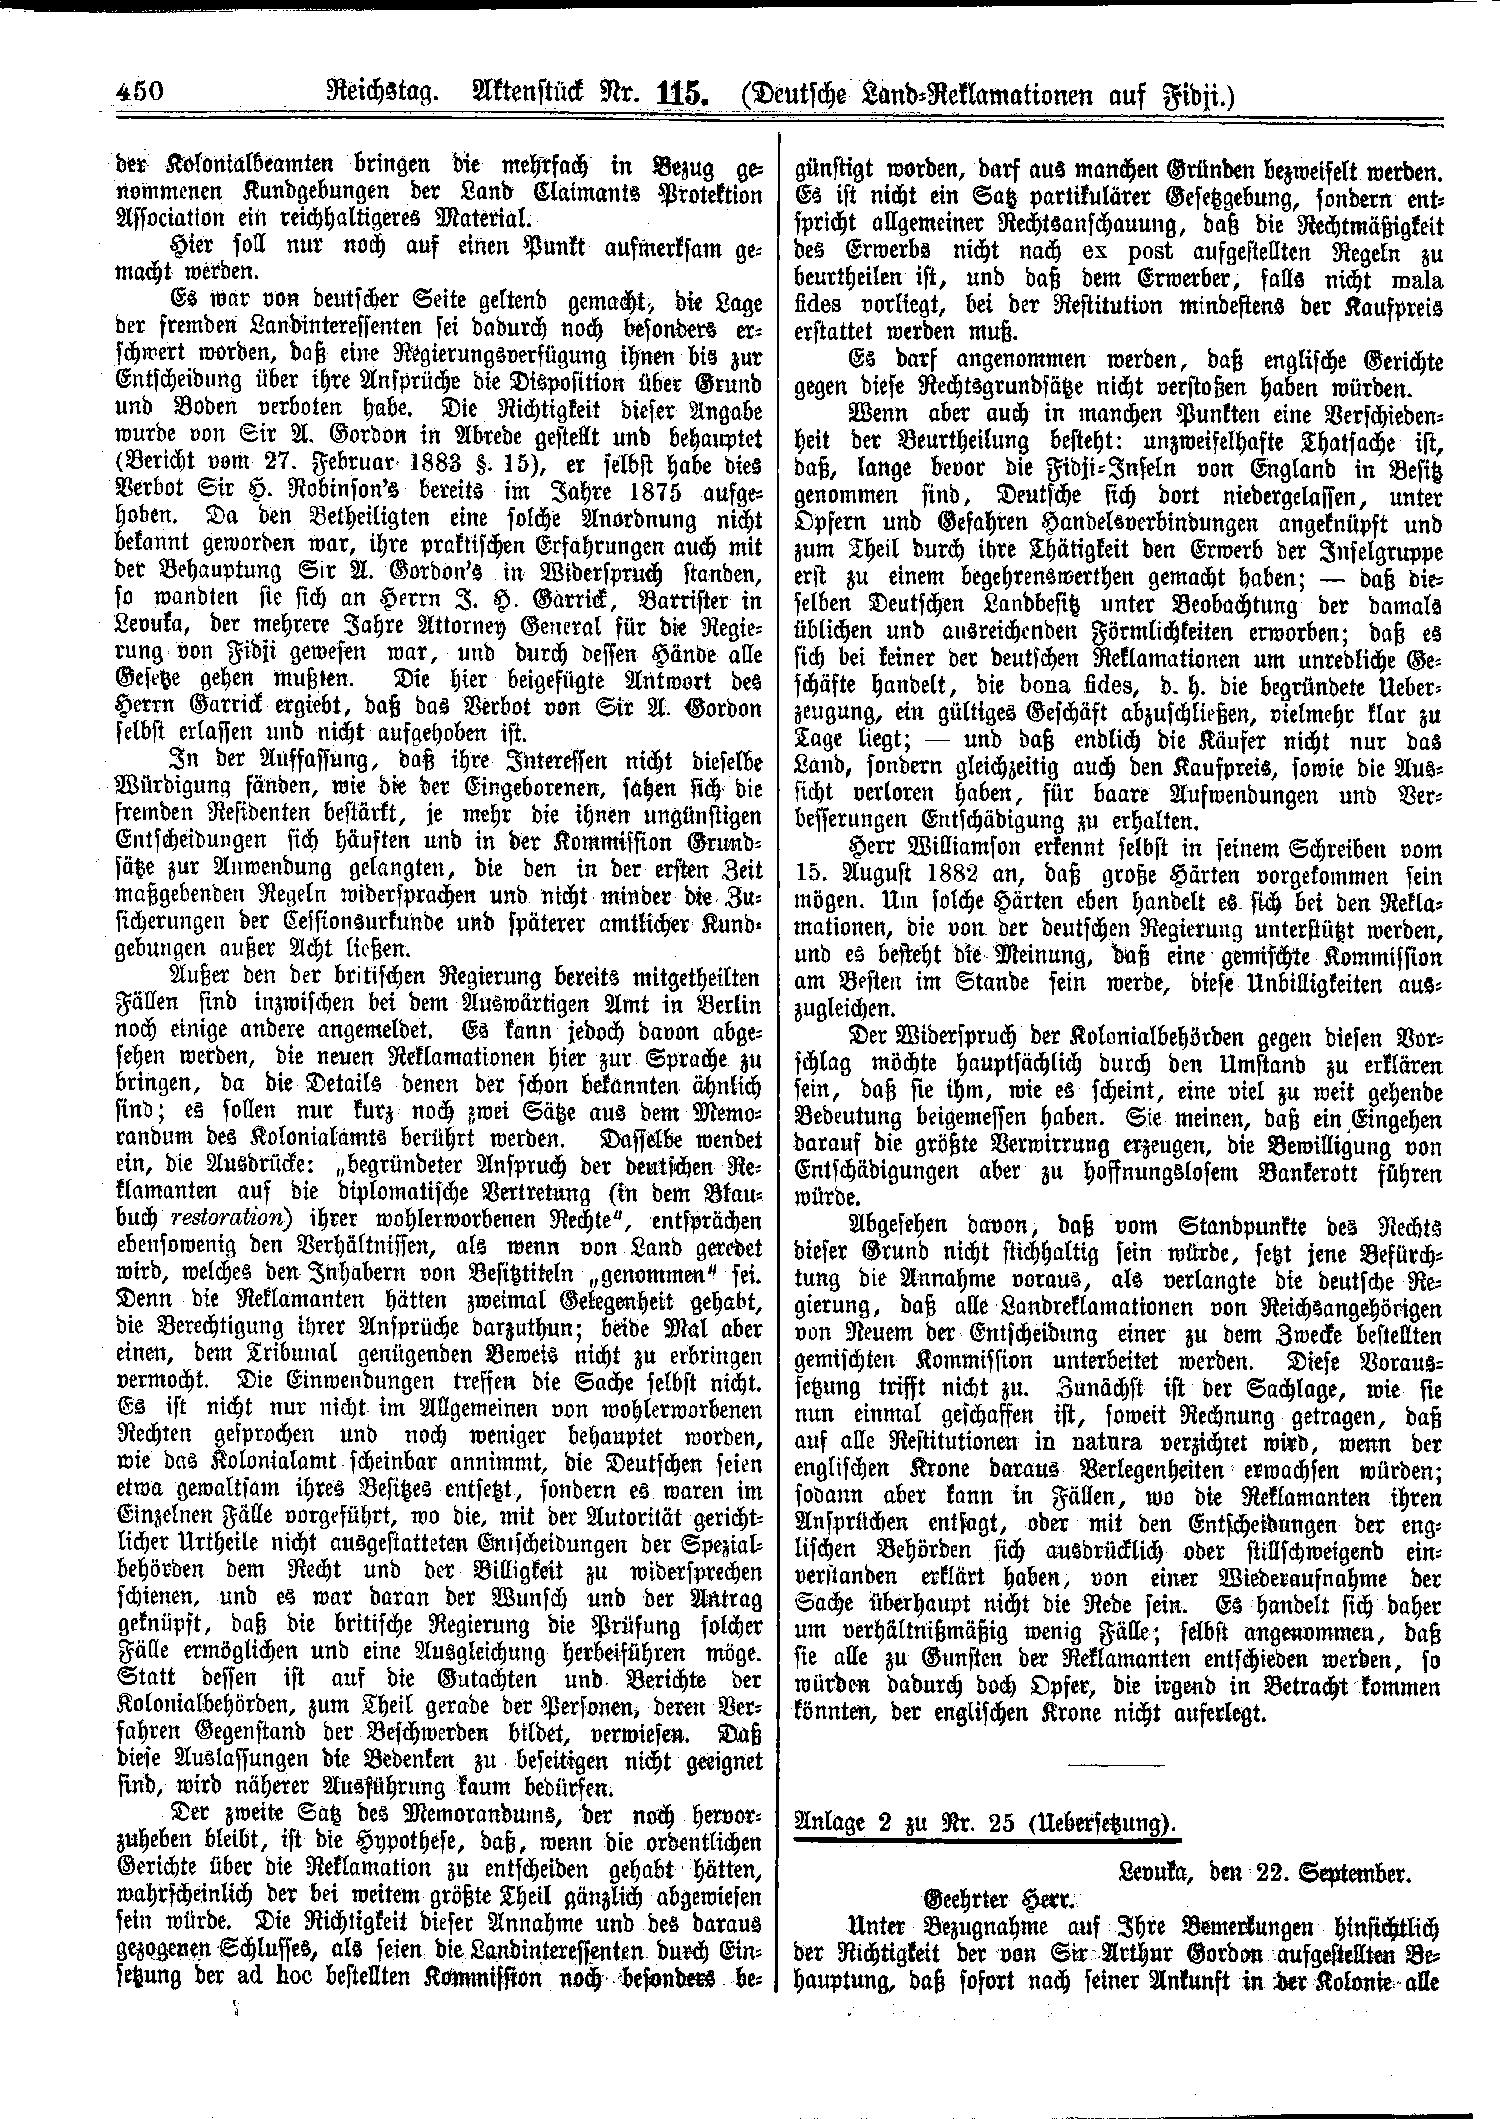 Scan of page 450